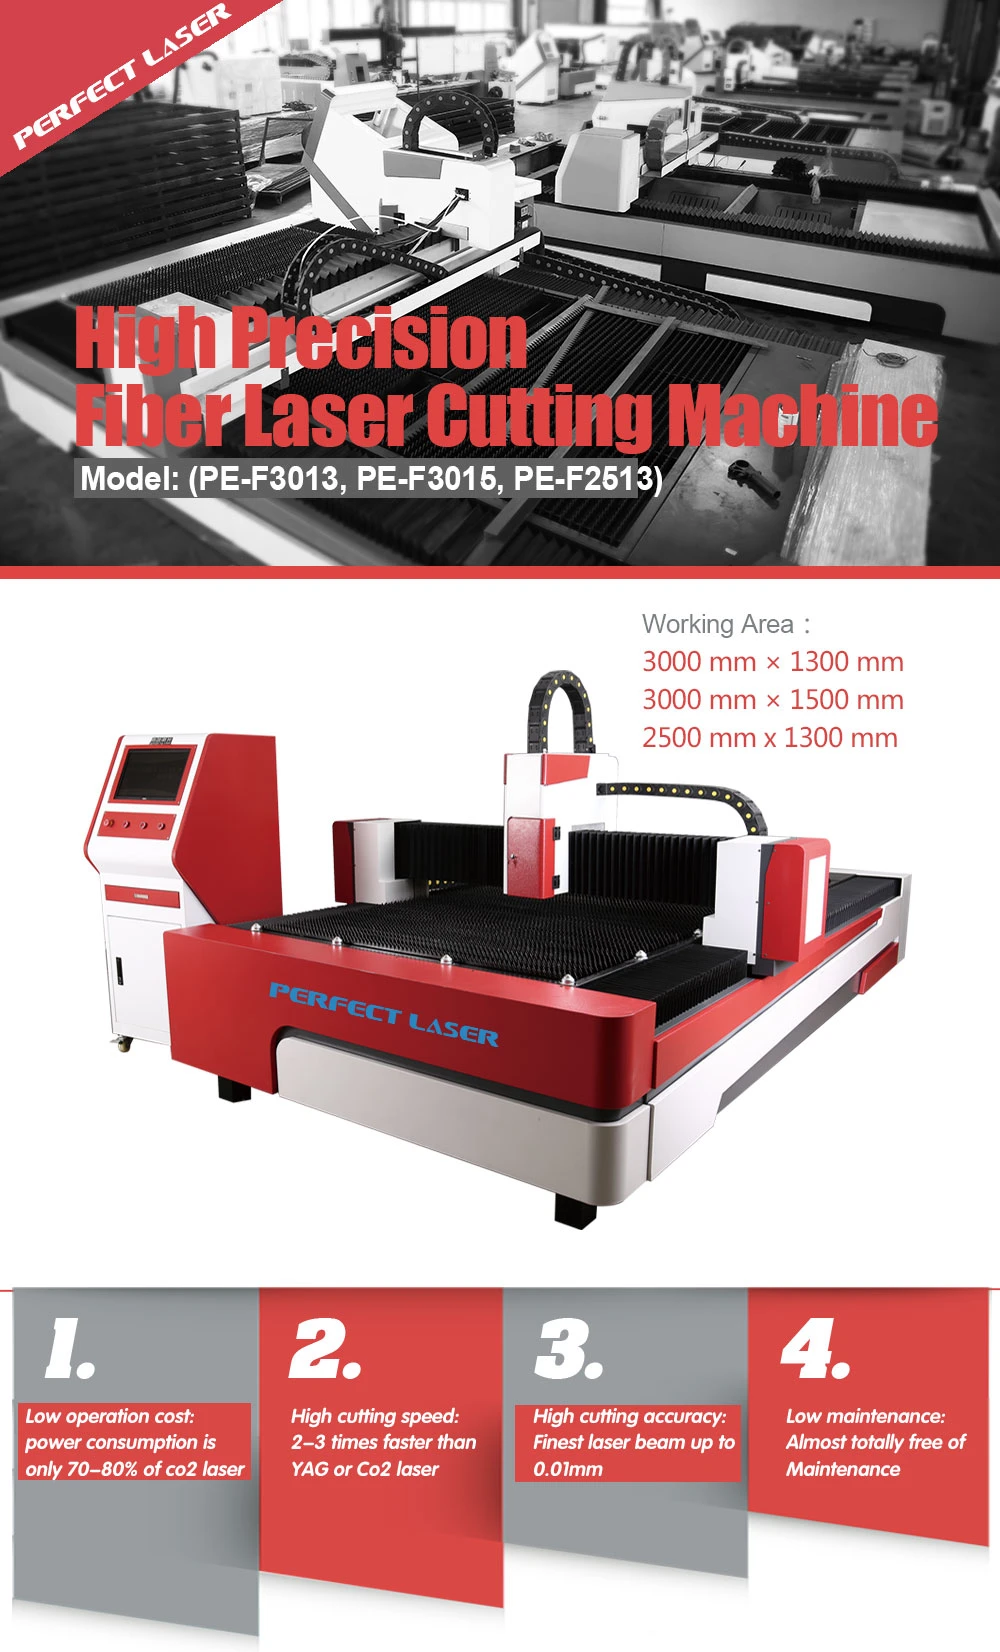 Perfect Laser-Hot Selling 1kw 2kw 500W 1000W 2000W 3000 Watt 1530 3015 Ipg/Raycus CNC Metal /Stainless Steel/Carbon Plate Fiber Laser Cutter Cutting Machines